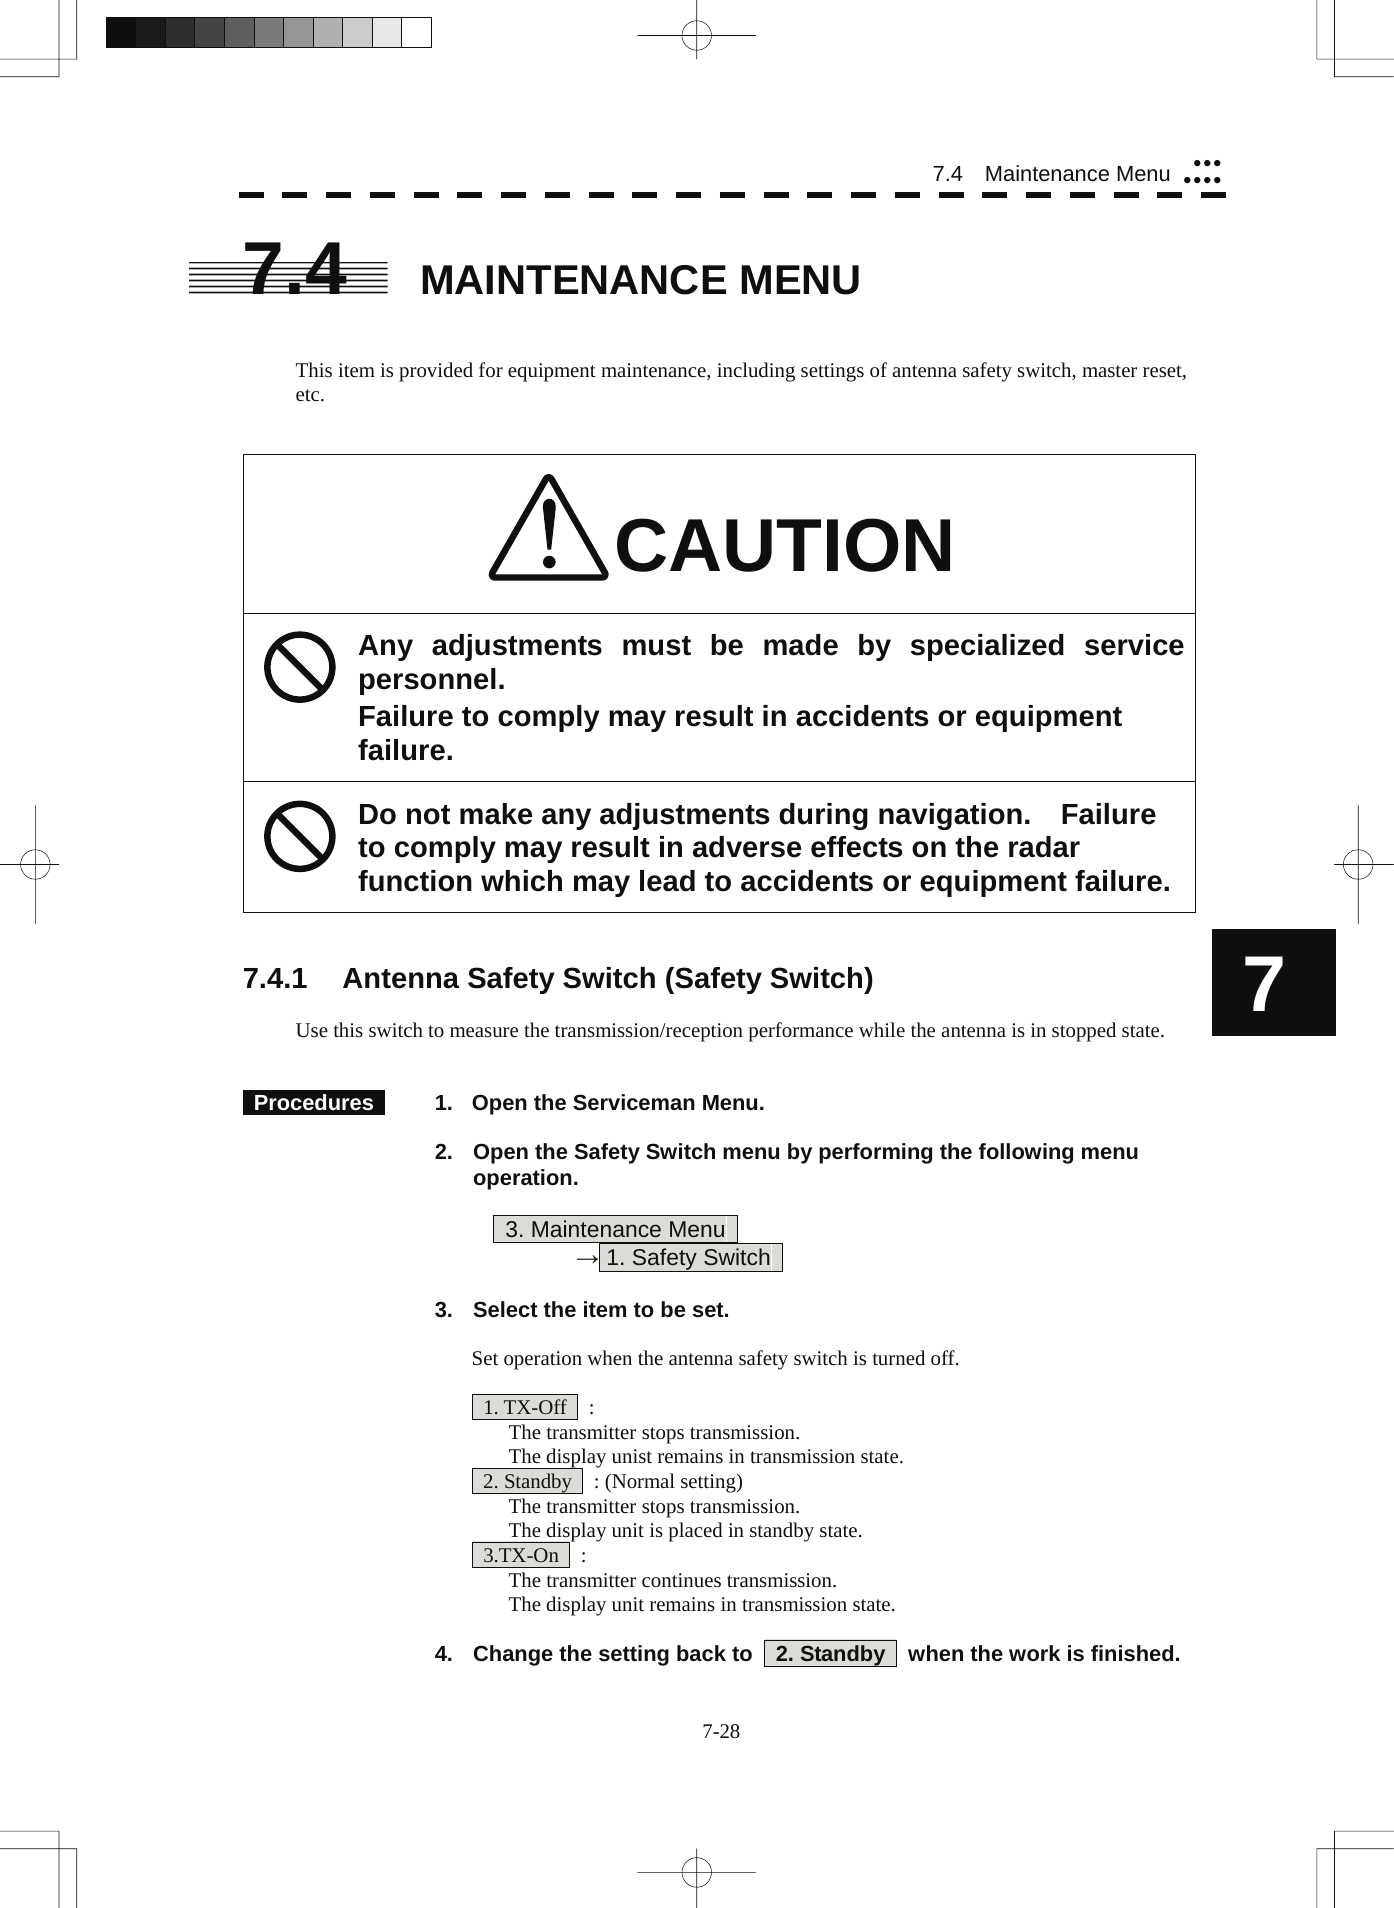  7-28 7.4  Maintenance Menu yyyyyyy7 7.4 MAINTENANCE MENU   This item is provided for equipment maintenance, including settings of antenna safety switch, master reset, etc.   CAUTION Any adjustments must be made by specialized service personnel. Failure to comply may result in accidents or equipment failure. Do not make any adjustments during navigation.    Failure to comply may result in adverse effects on the radar function which may lead to accidents or equipment failure.   7.4.1  Antenna Safety Switch (Safety Switch)  Use this switch to measure the transmission/reception performance while the antenna is in stopped state.    Procedures    1.  Open the Serviceman Menu.  2.  Open the Safety Switch menu by performing the following menu operation.          3. Maintenance Menu       → 1. Safety Switch    3.  Select the item to be set.  Set operation when the antenna safety switch is turned off.   1. TX-Off  :   The transmitter stops transmission.   The display unist remains in transmission state.   2. Standby    : (Normal setting)   The transmitter stops transmission.   The display unit is placed in standby state.  3.TX-On  :   The transmitter continues transmission.   The display unit remains in transmission state.  4.  Change the setting back to    2. Standby    when the work is finished. 